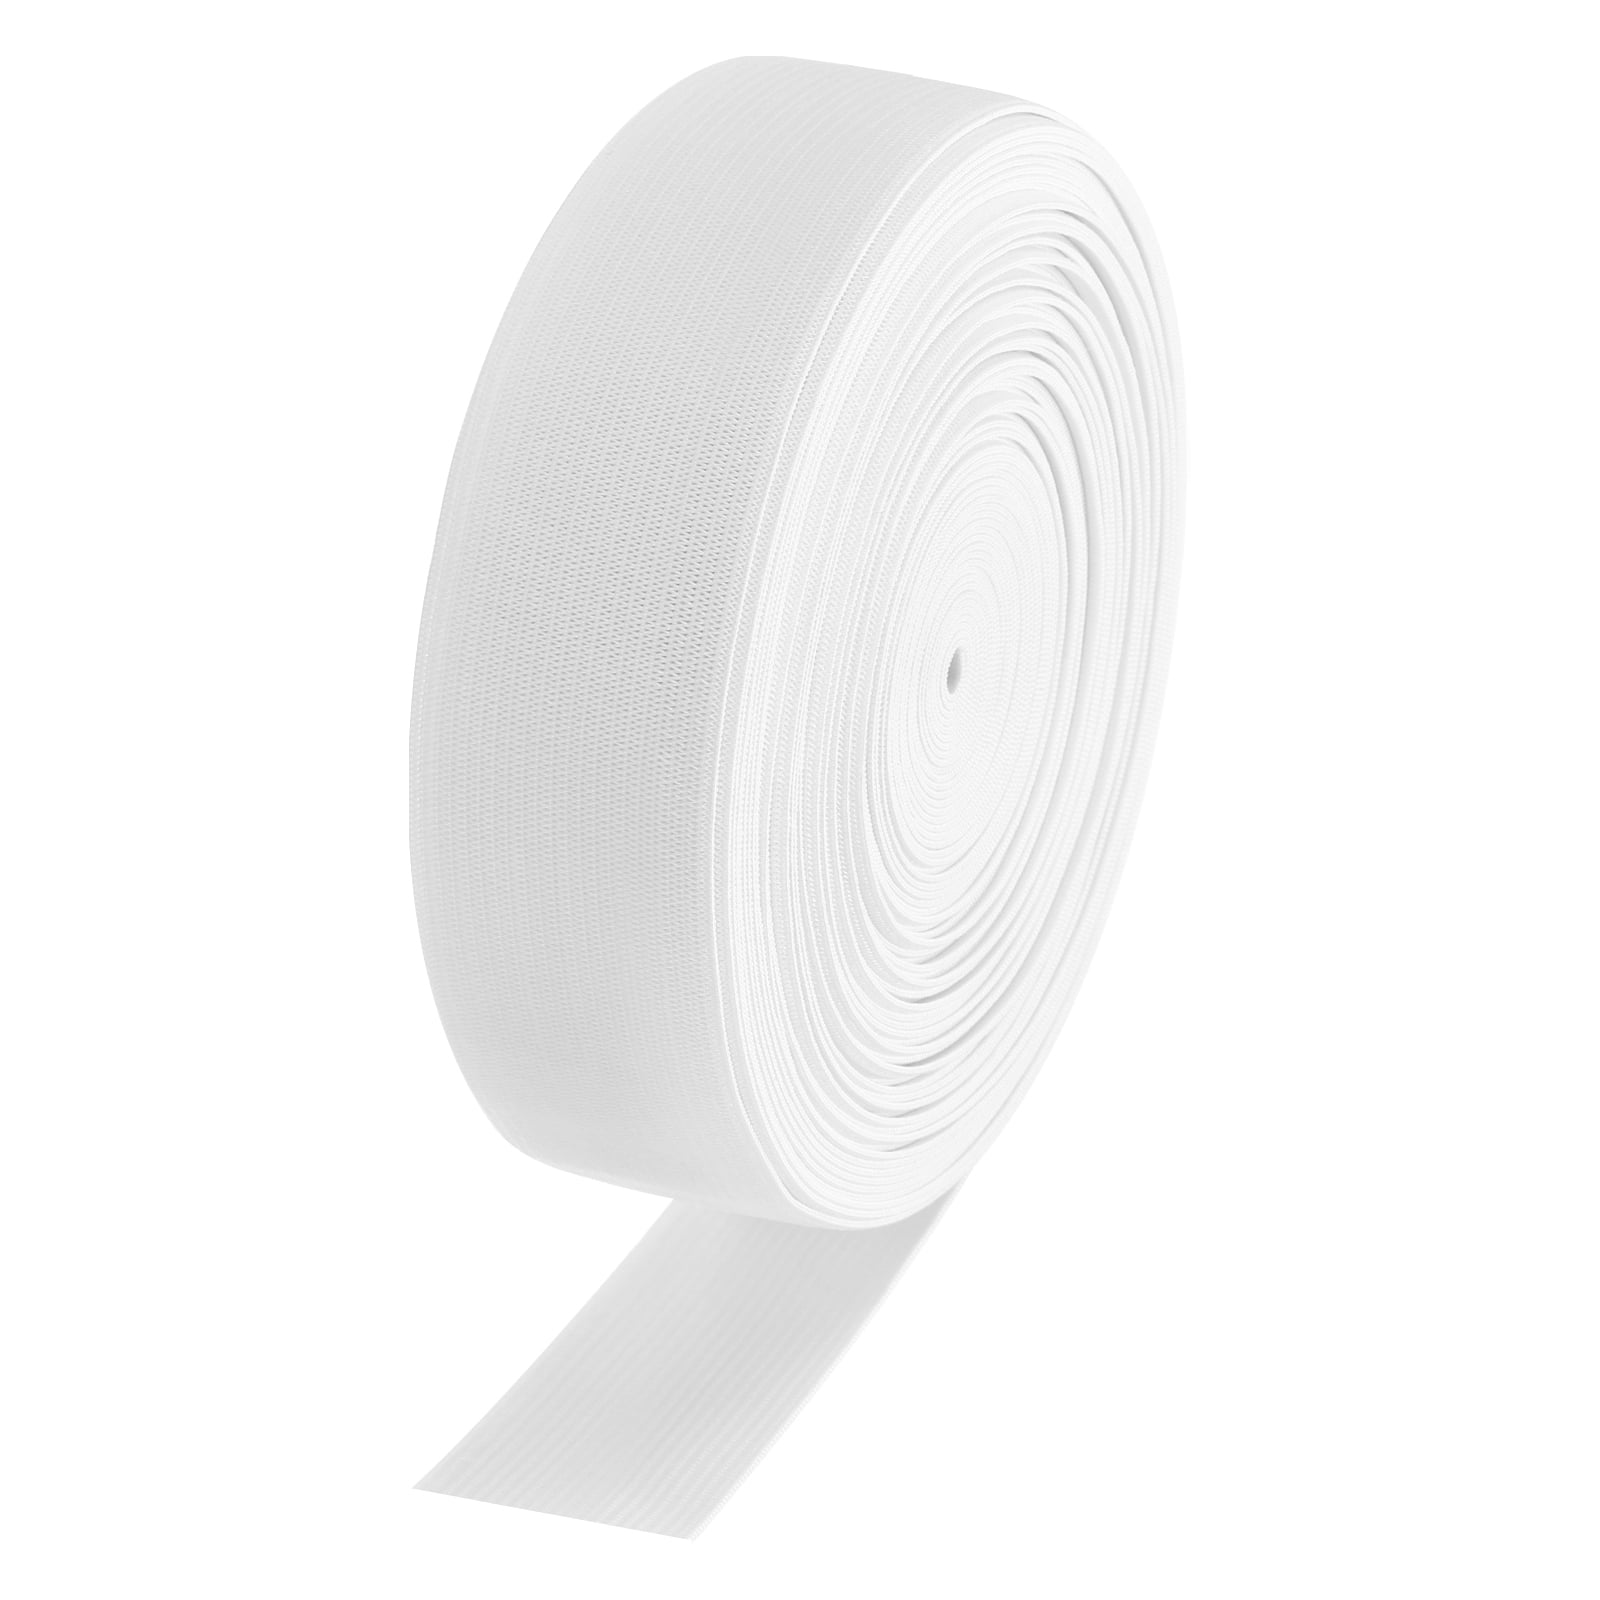 Elastic White Elastic for Sewing Knit Elastic Band (3/8 inch x 11 Yards)